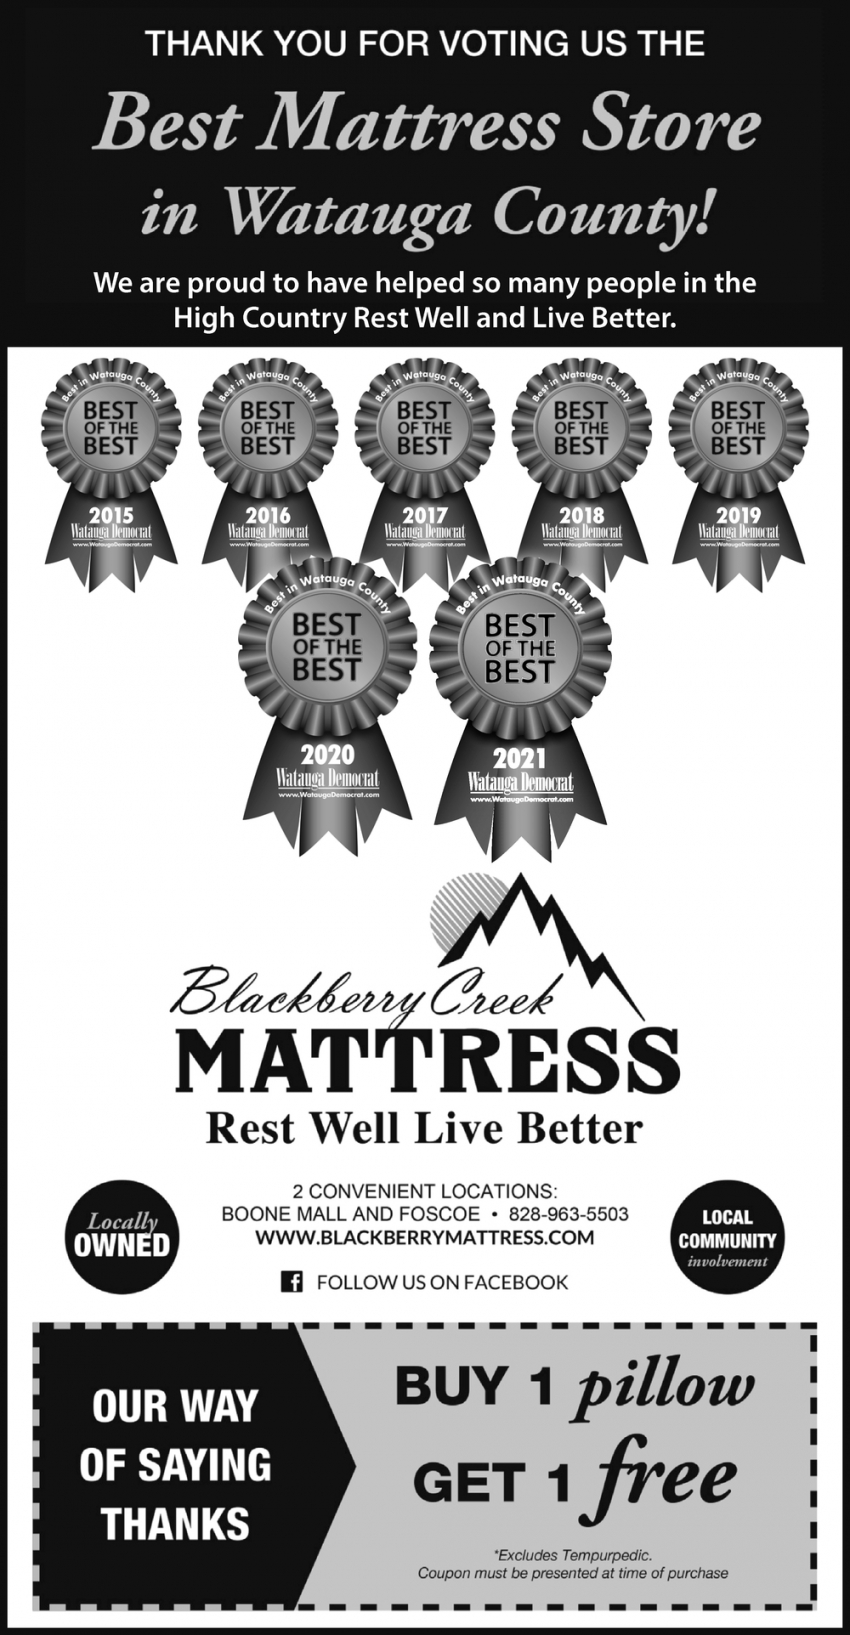 Thank You For Voting Us The Best Matress Store In Watauga